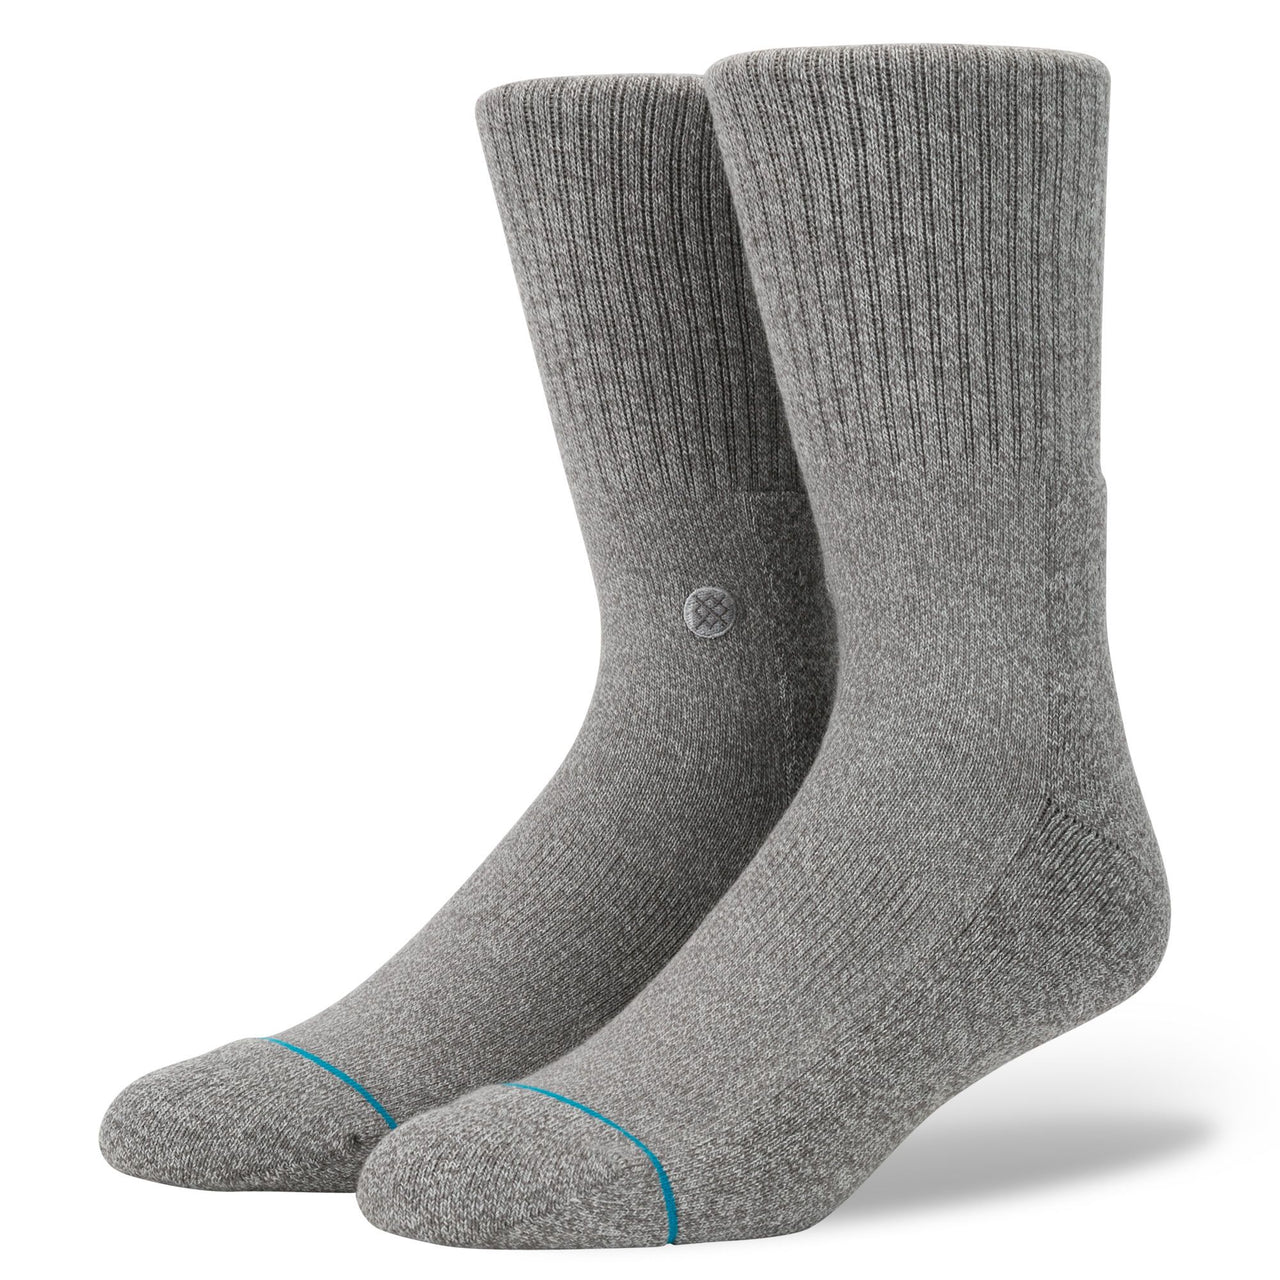 Stance Icon 3 Pack Socks - Grey Heather image 1